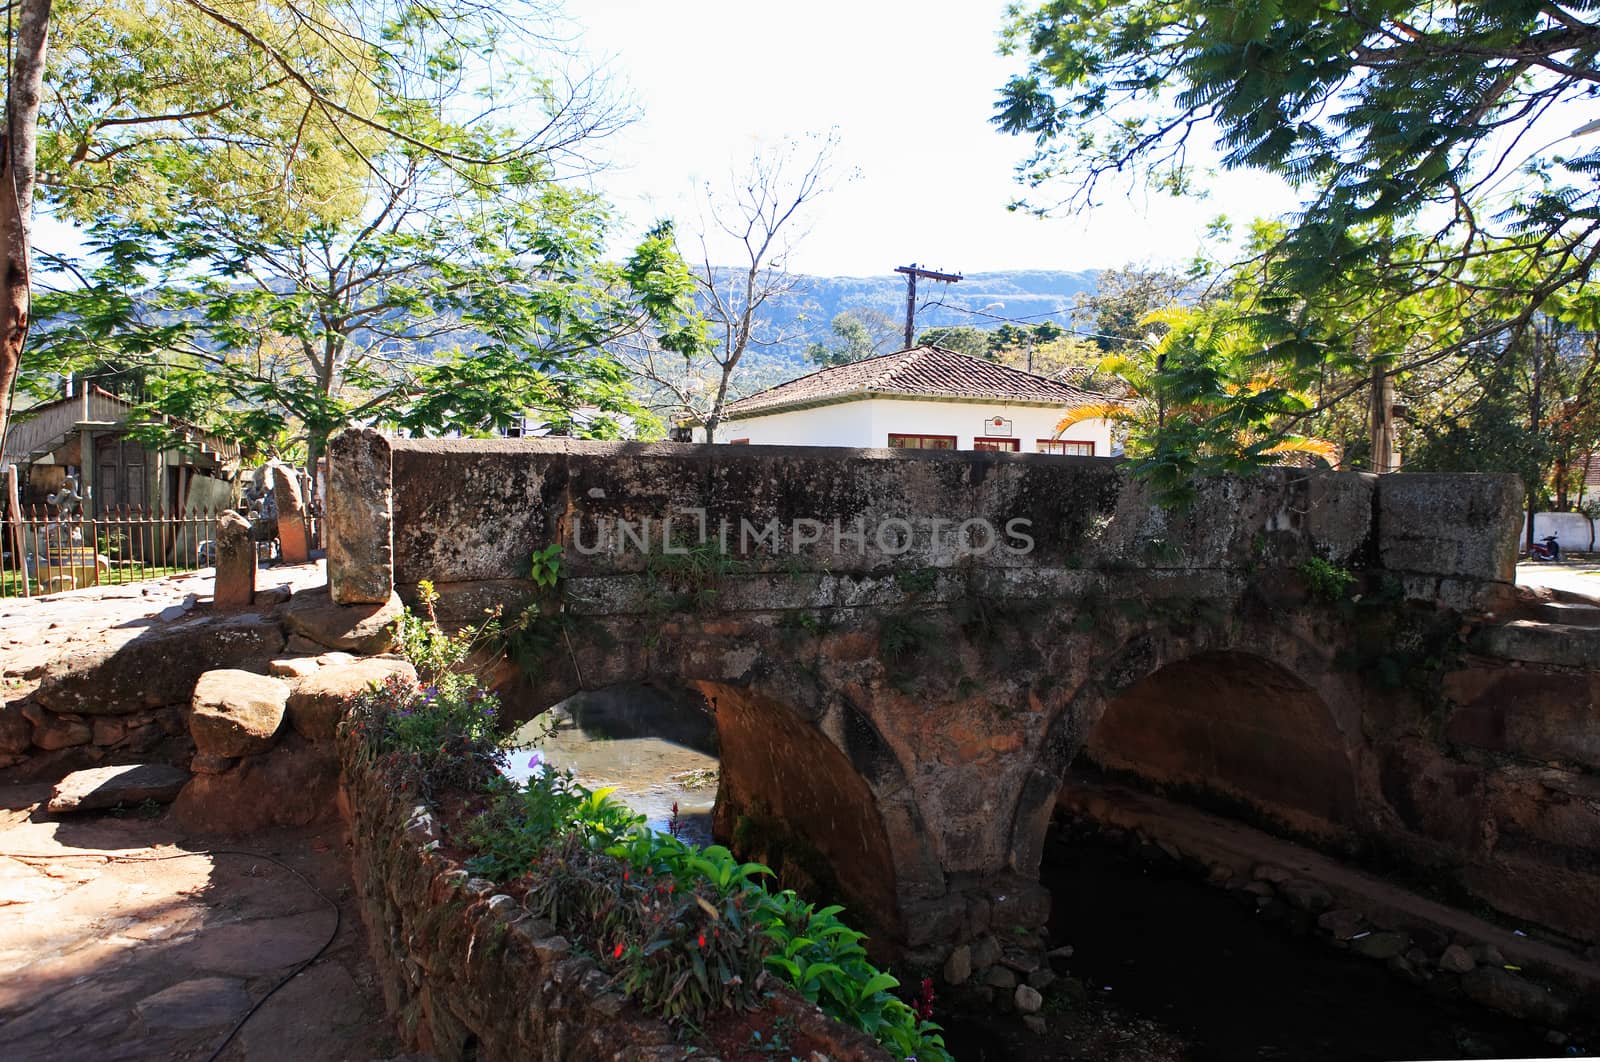 old stone bridge at the typical village of tiradente in minas gerais state in brazil